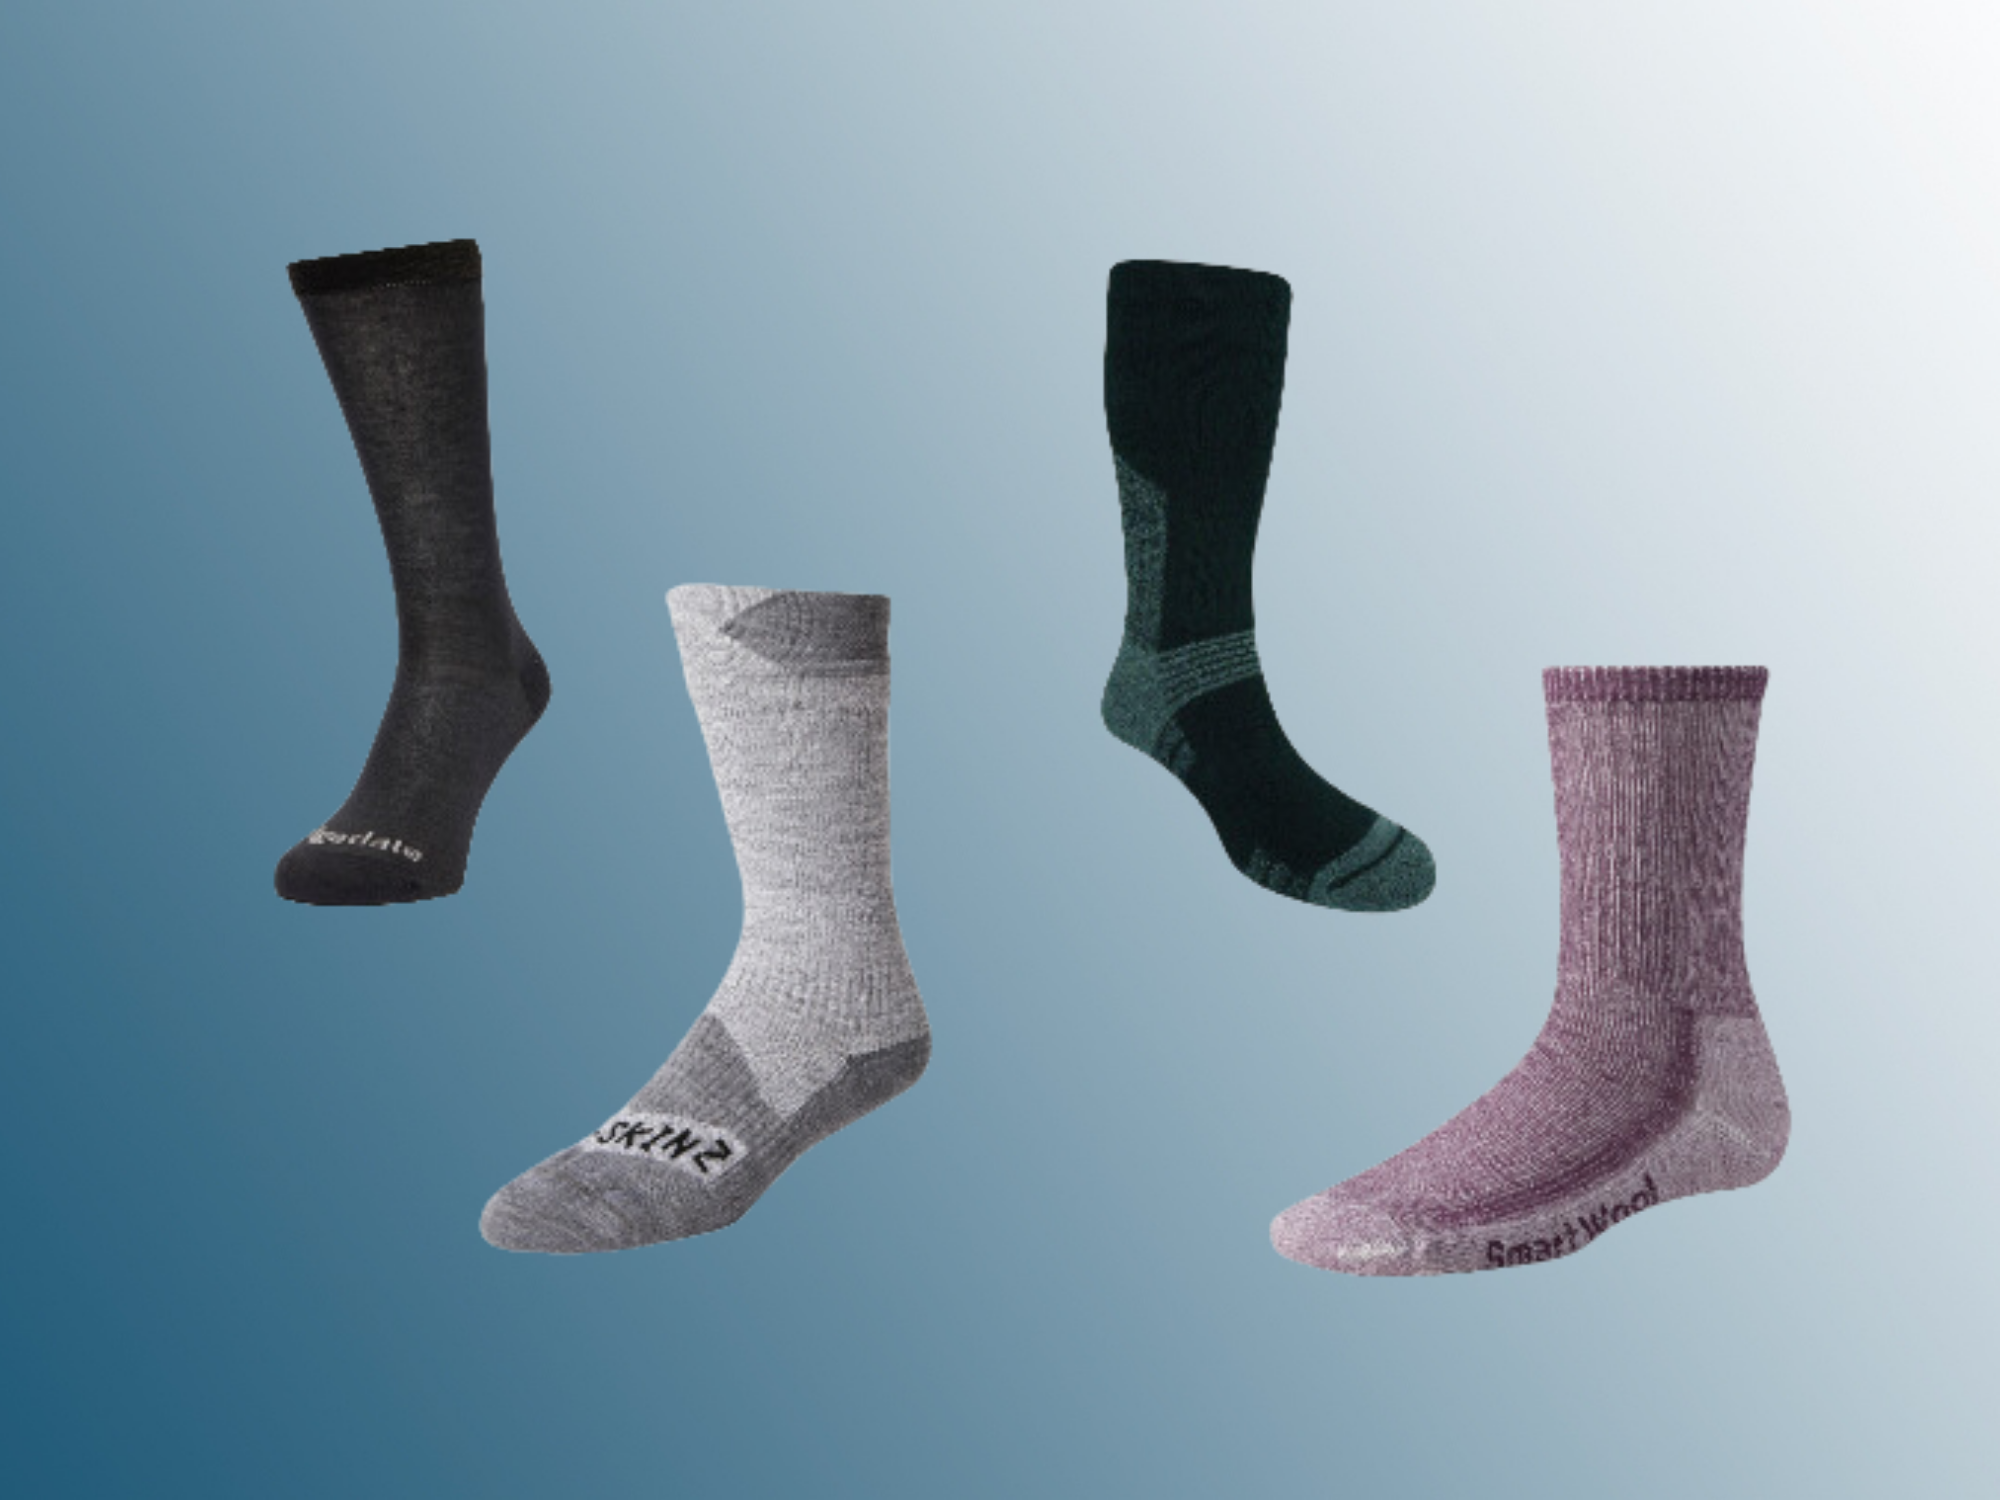 Double Dry 6-Pair Pack Cotton-Rich Crew Socks at  Men's